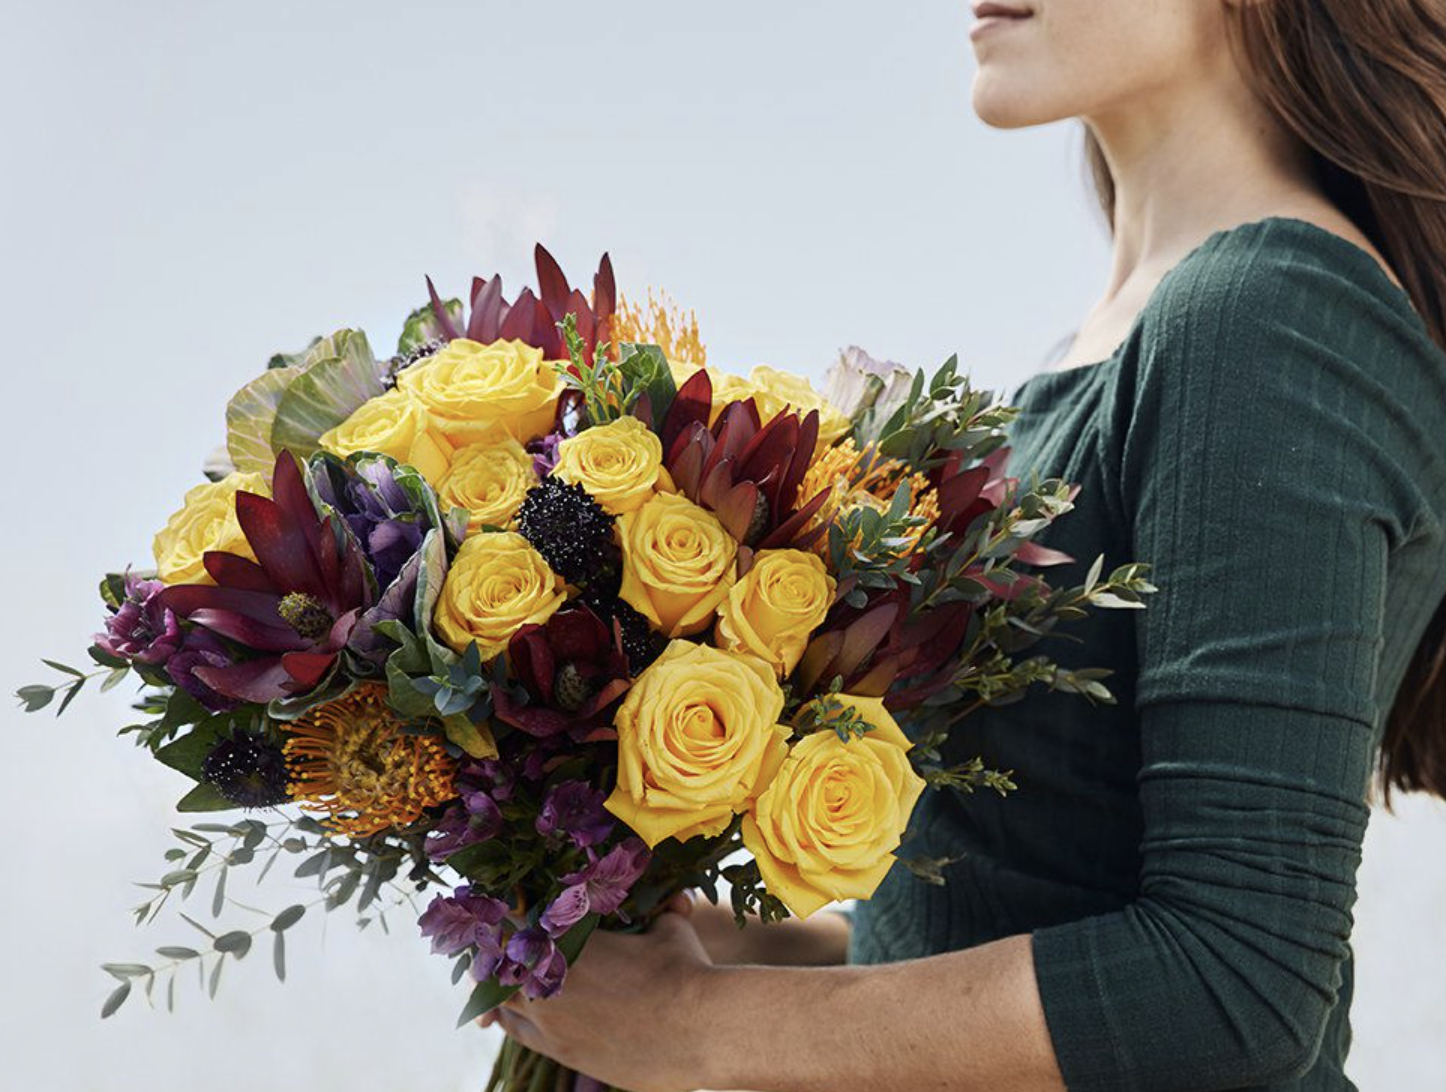 A model holding a bouquet of multicolor roses and other flowers 